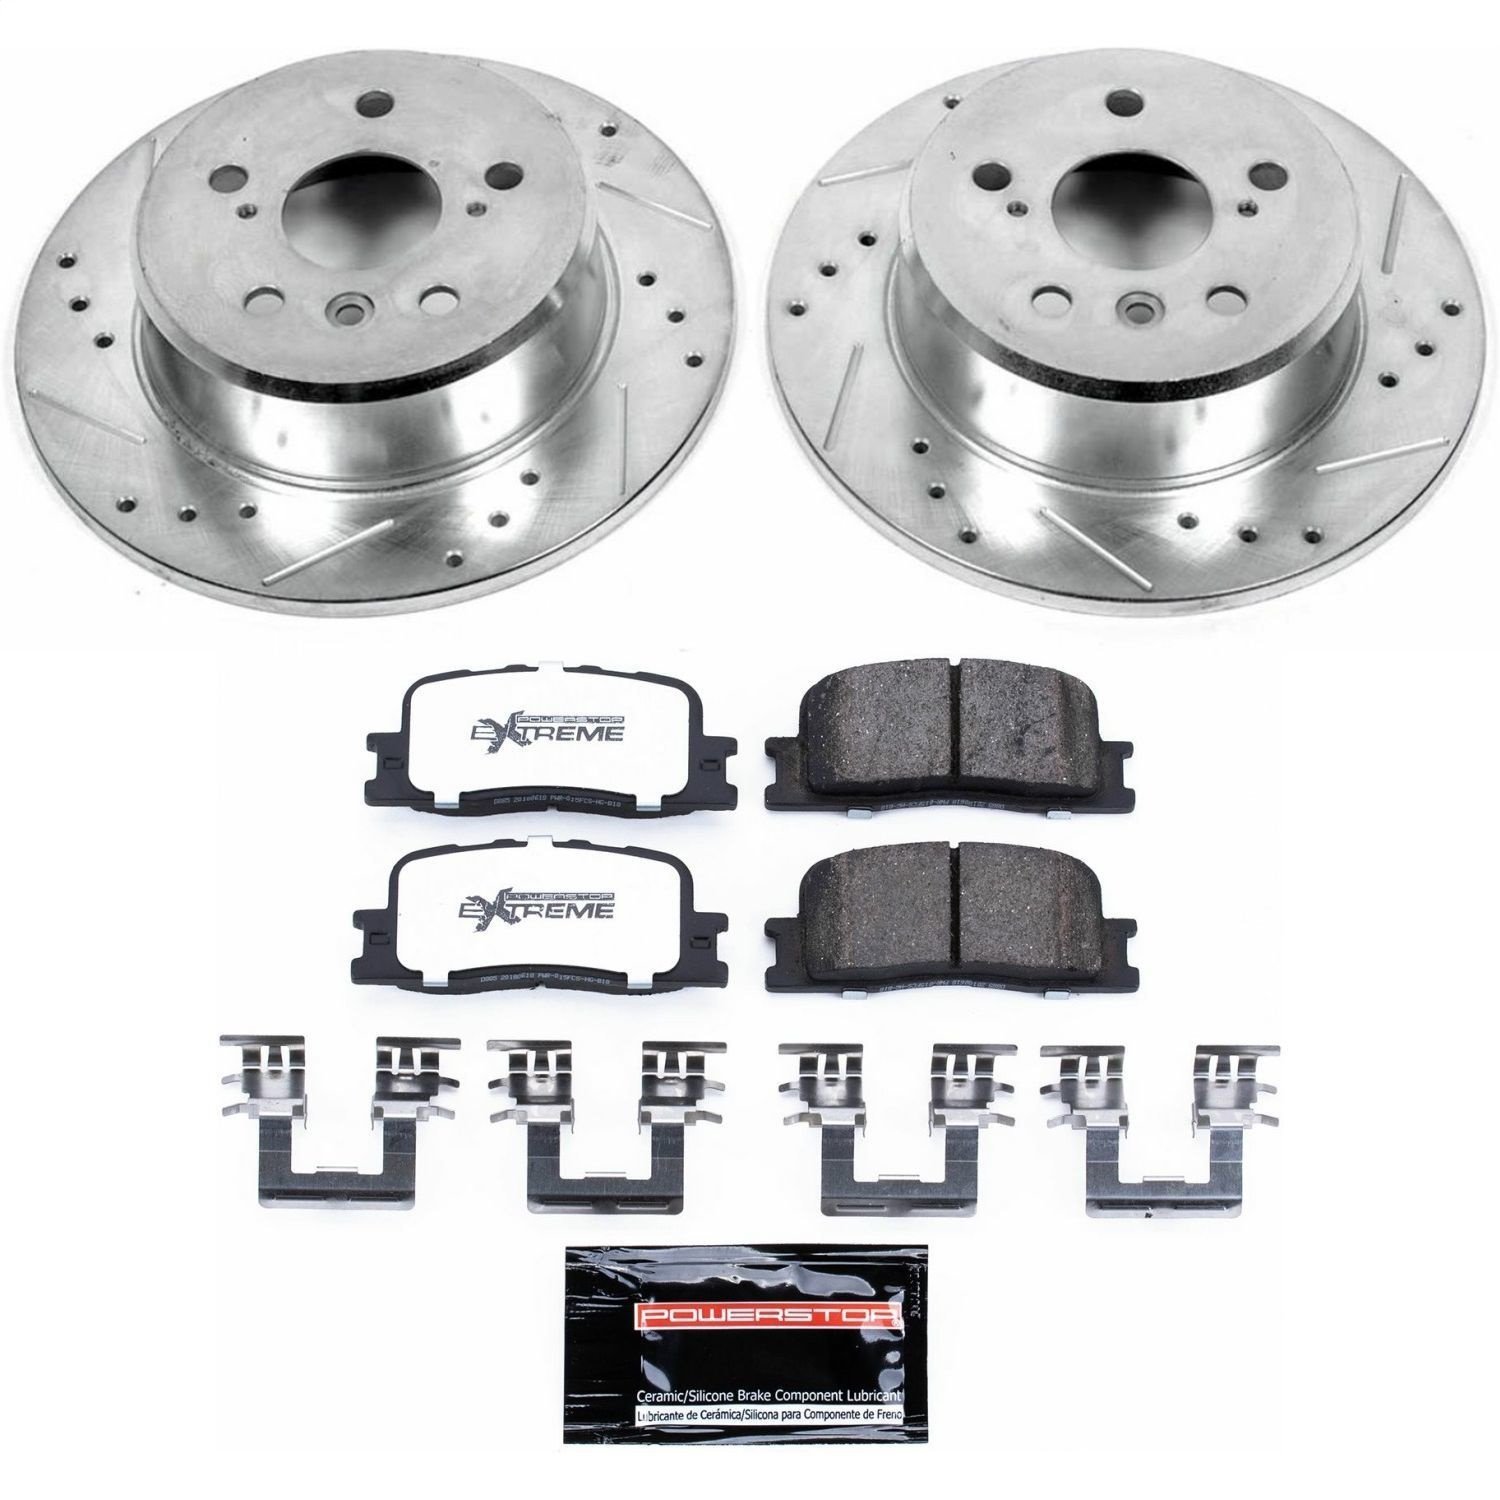 Z-36 Heavy Duty Truck and Tow Rear Brake Kit for 2001-2003 Toyota Highlander